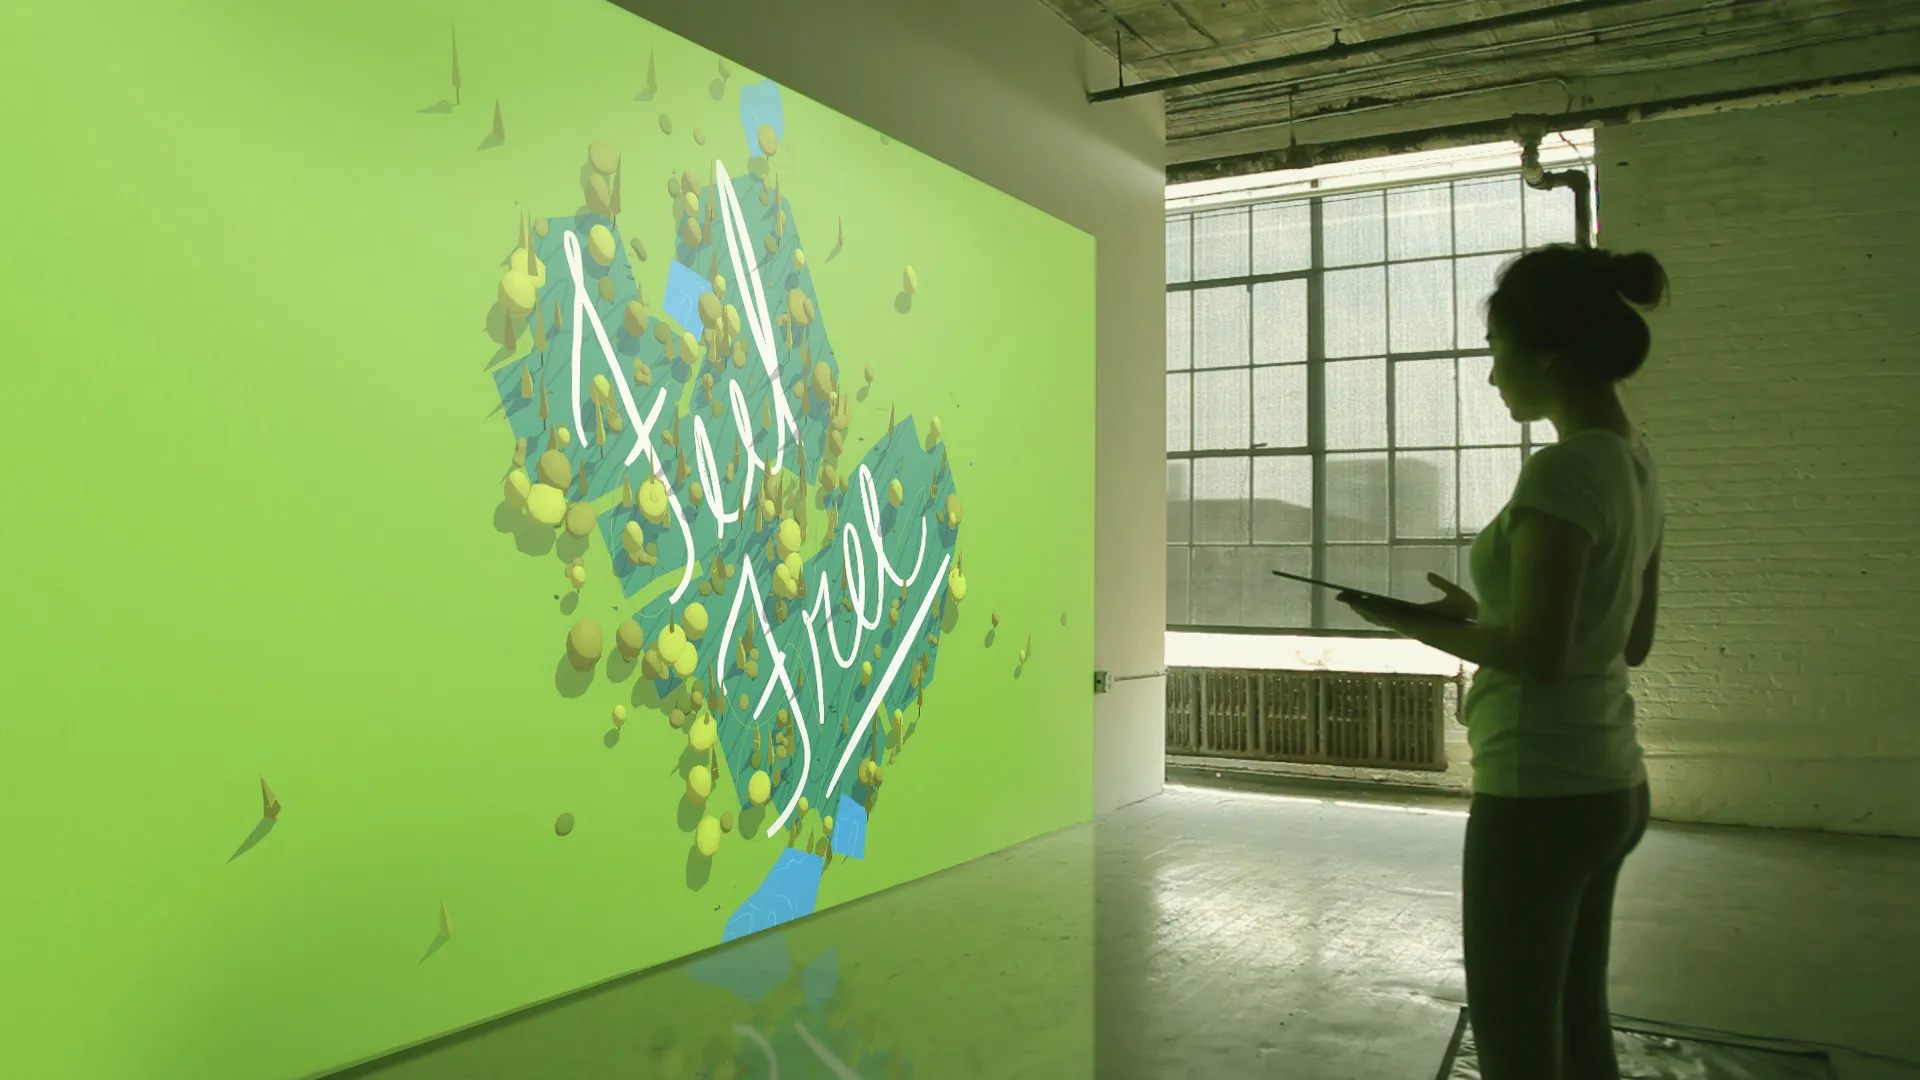 A custome drawing engine allows you to write or draw your mantra on a touch screen